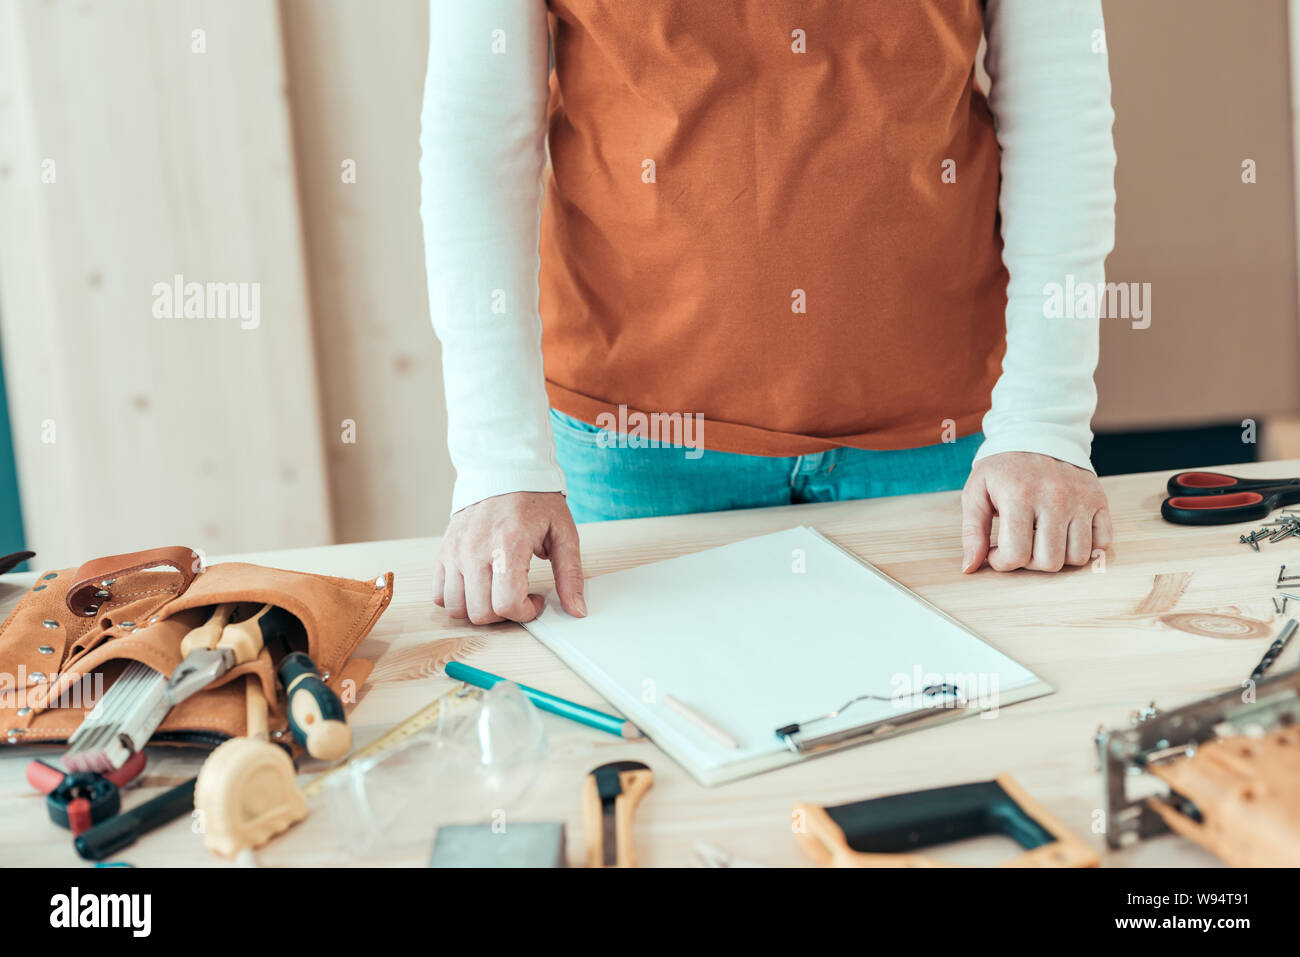 Female carpenter with hands on the desk in small business woodwork workshop Stock Photo